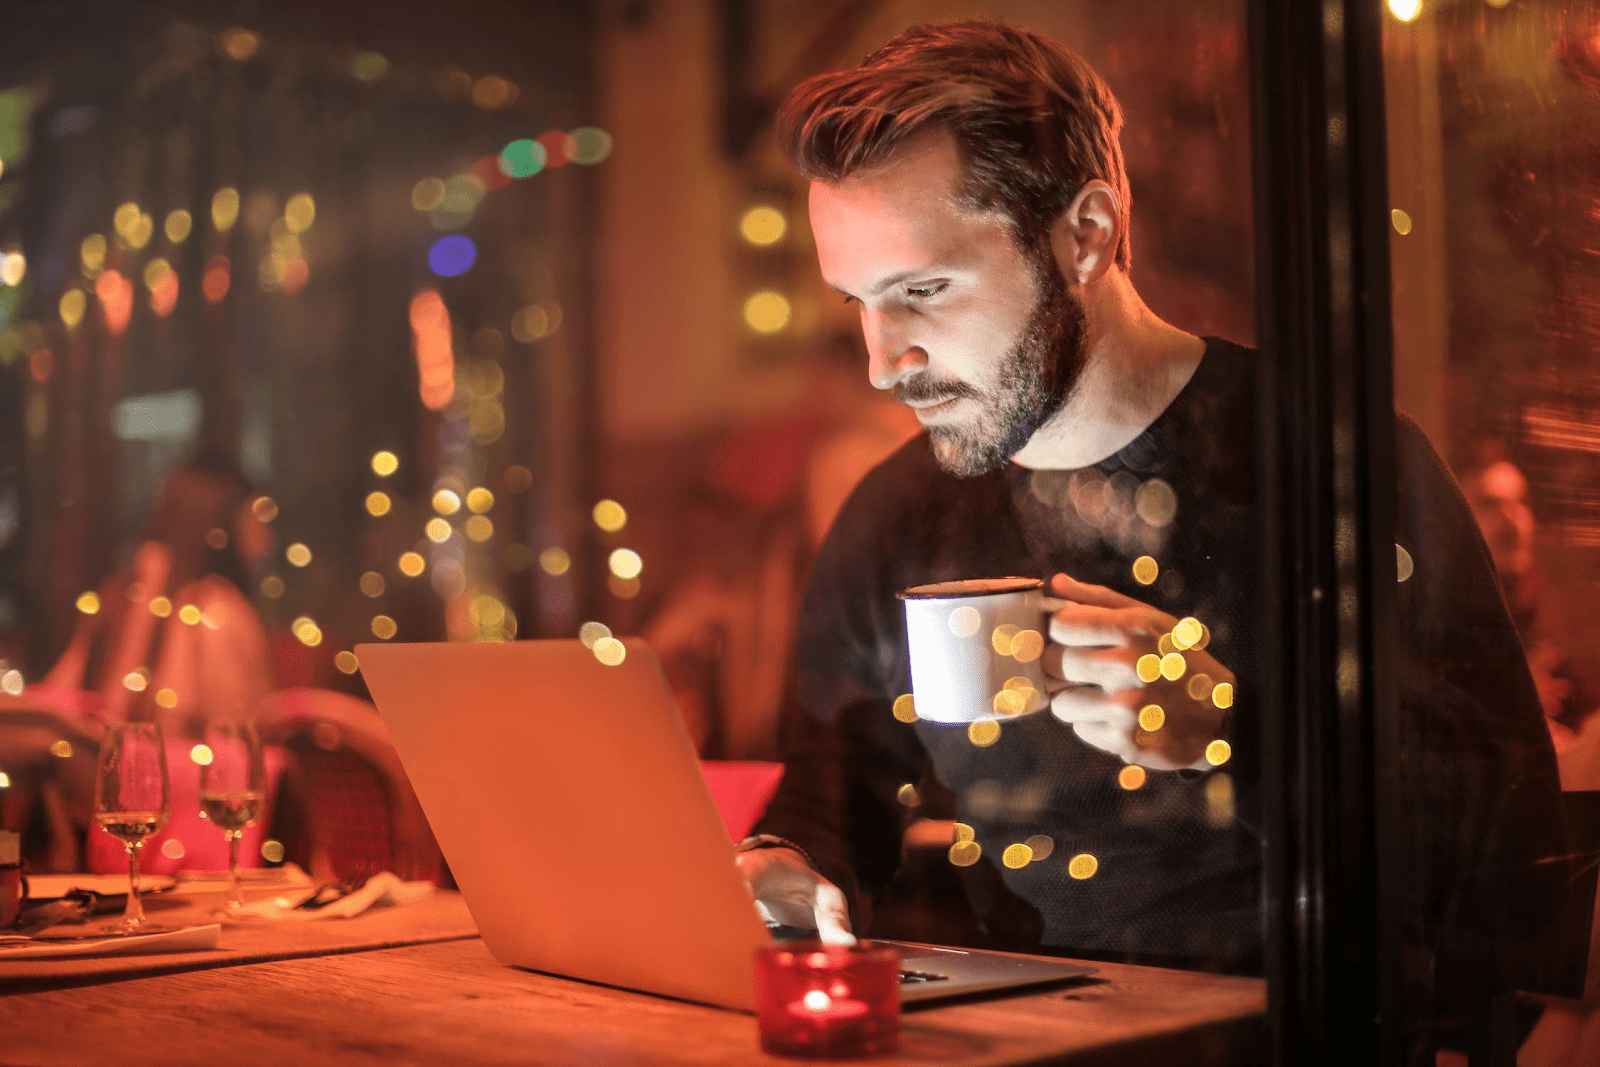 Man remote working at a restaurant at night